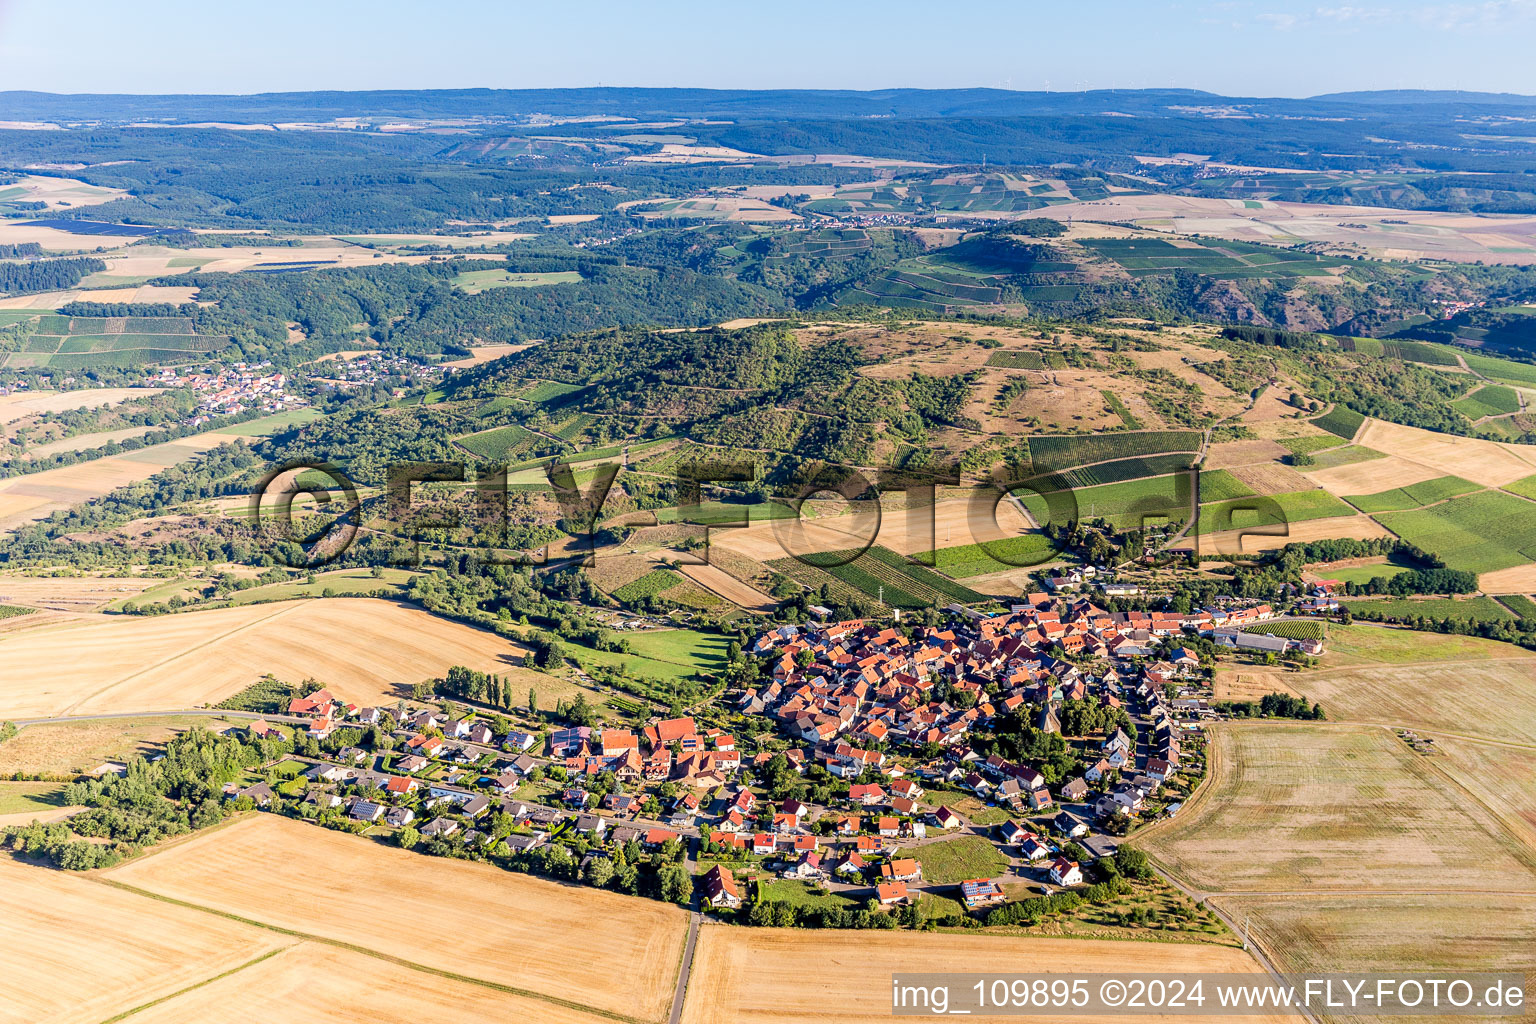 Over the Nahe valley in Duchroth in the state Rhineland-Palatinate, Germany